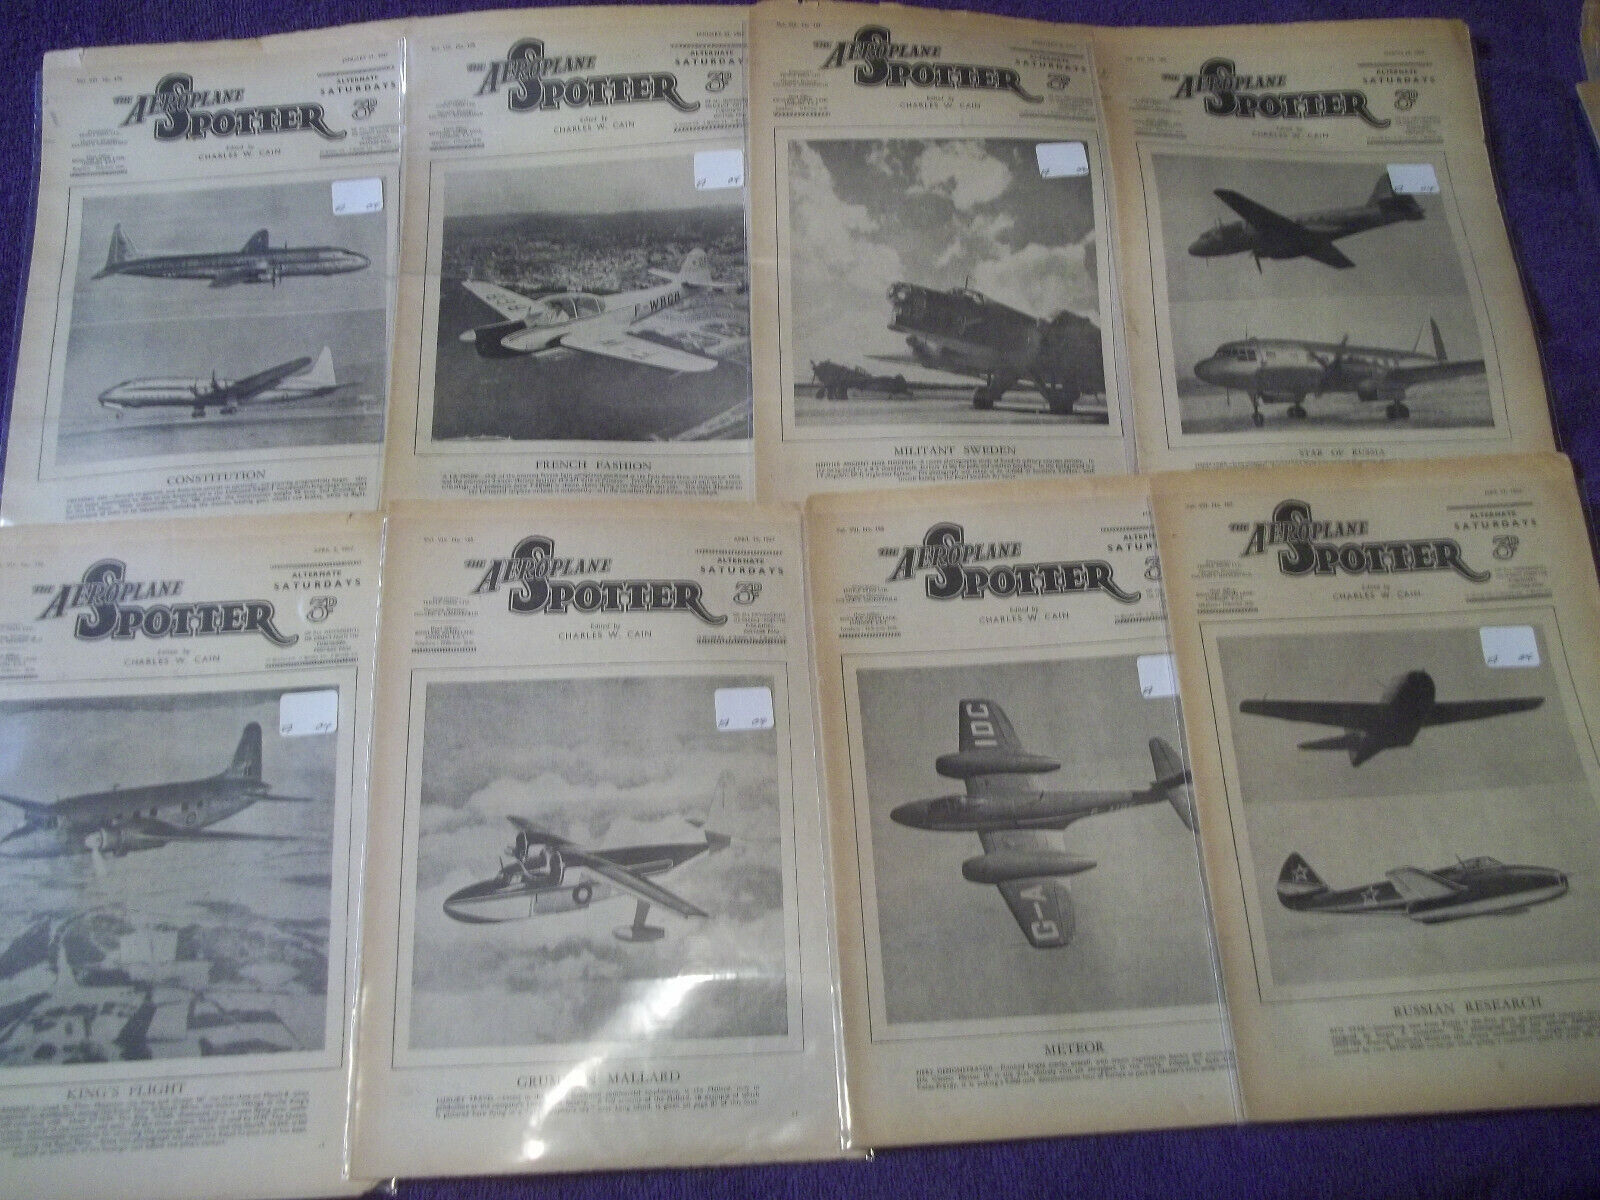  THE AEROPLANE SPOTTER MAG. 1947/8(BRITISH)36 ISSUE WWII Aircraft Photographs   